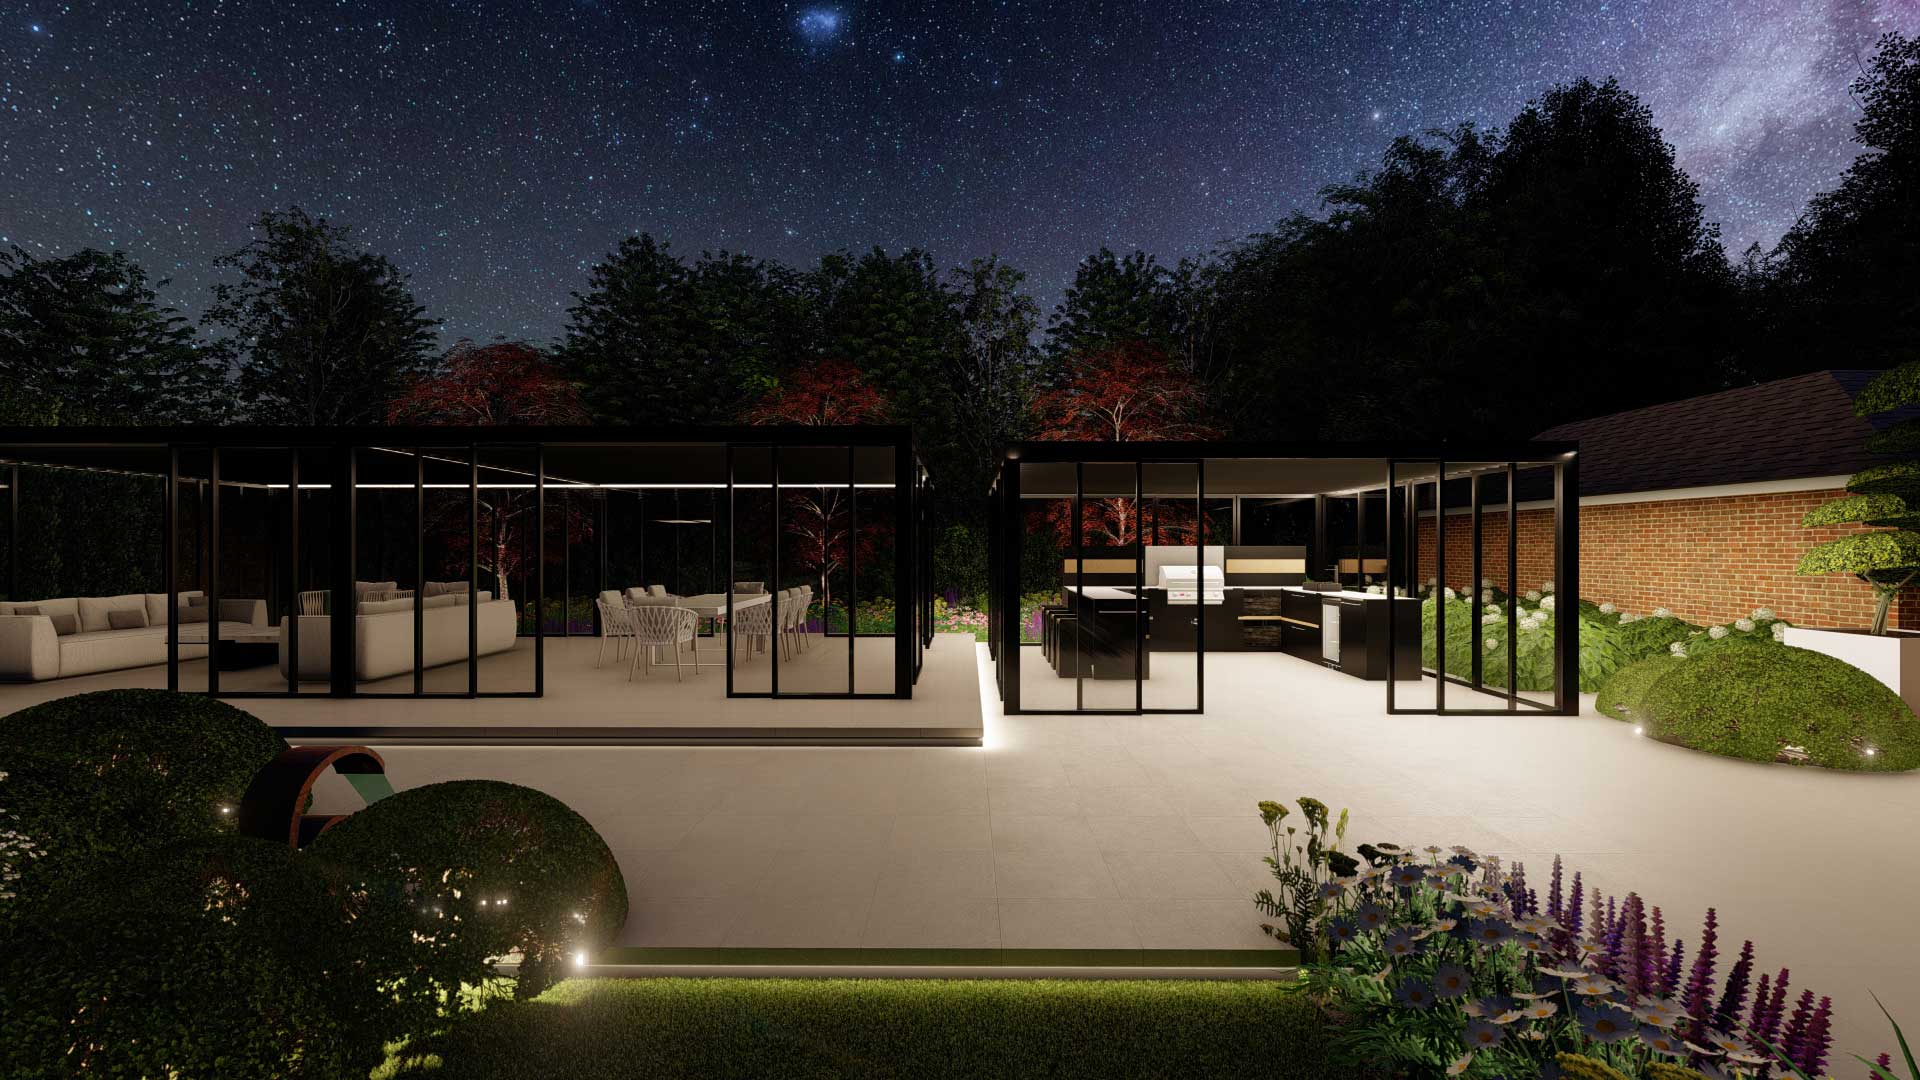 Night view of a garden with lots of lights, showing an aluminium garden pergola in black with some lovely planting in borders